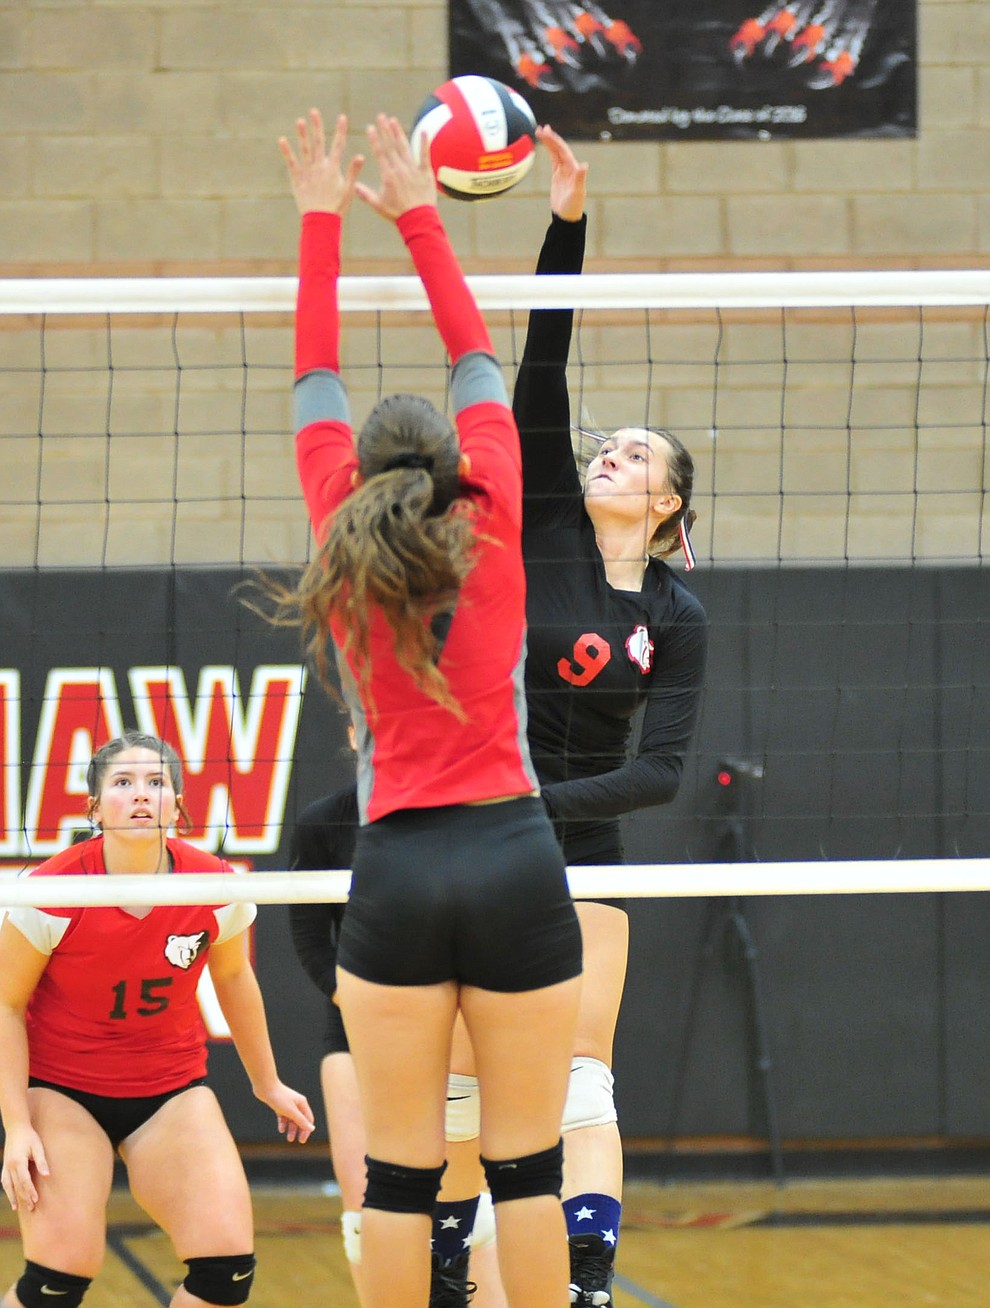 Bradshaw Mountain's Peyton Bradshaw goes high for a kill as the Bears faced the Mingus Marauders in a volleyball matchup Tuesday, Sept. 11, 2018 in Prescott Valley. (Les Stukenberg/Courier)